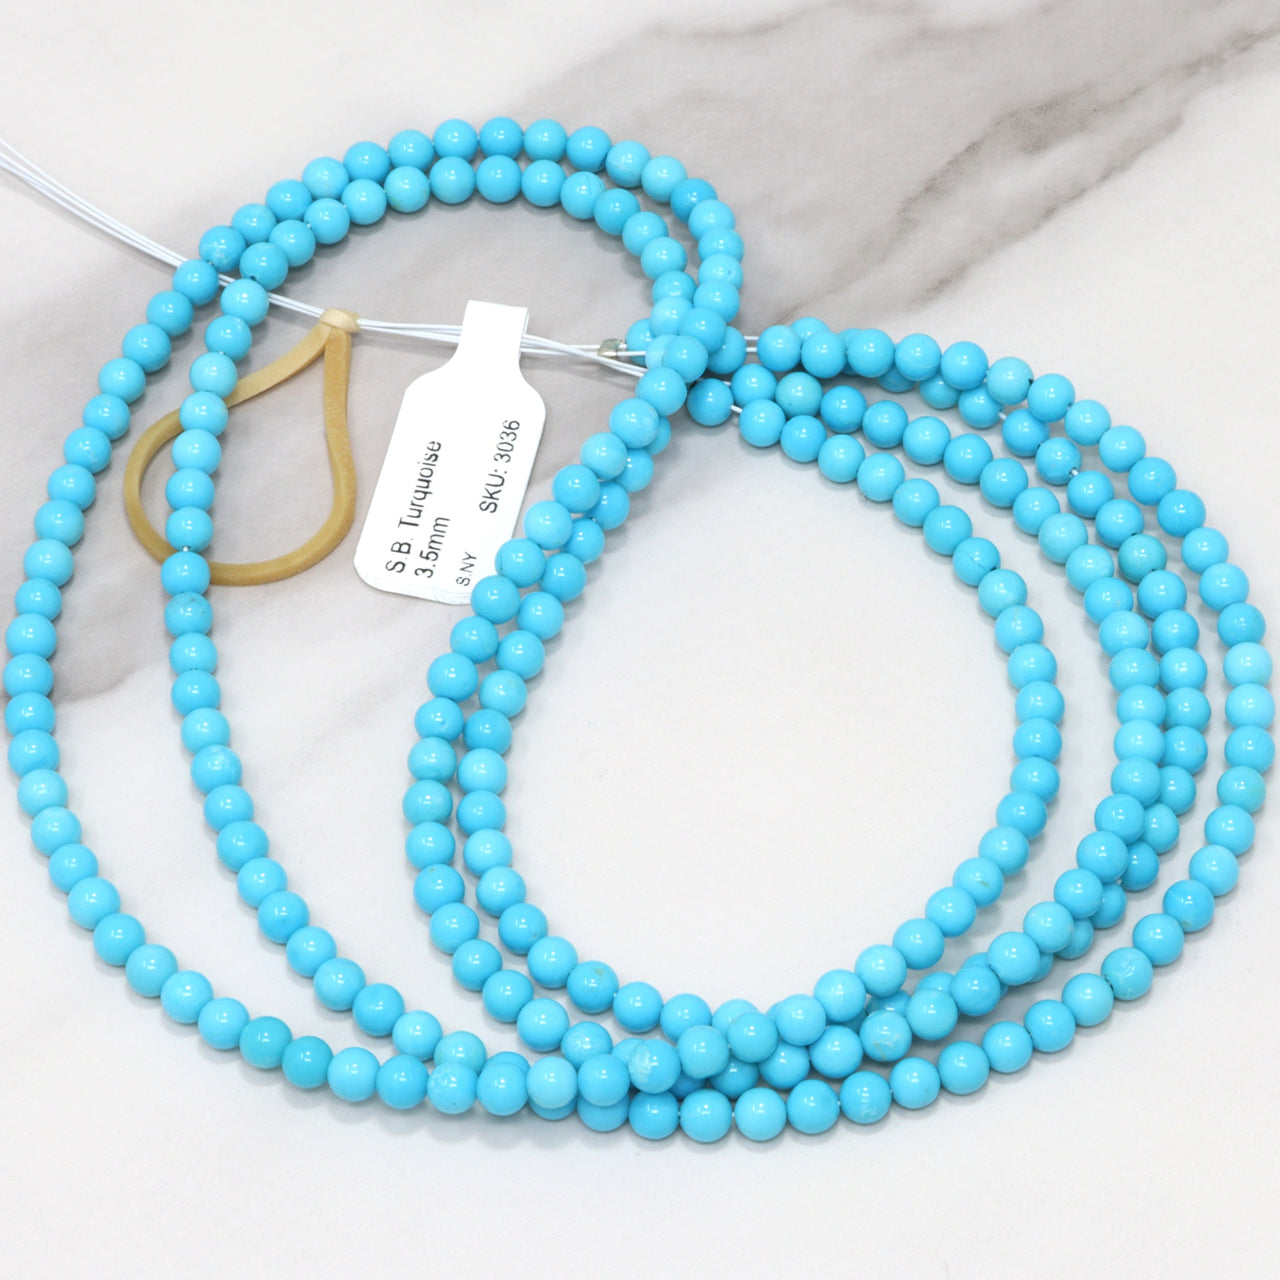 Sleeping Beauty Turquoise 3.5mm Smooth Rounds Bead Strand